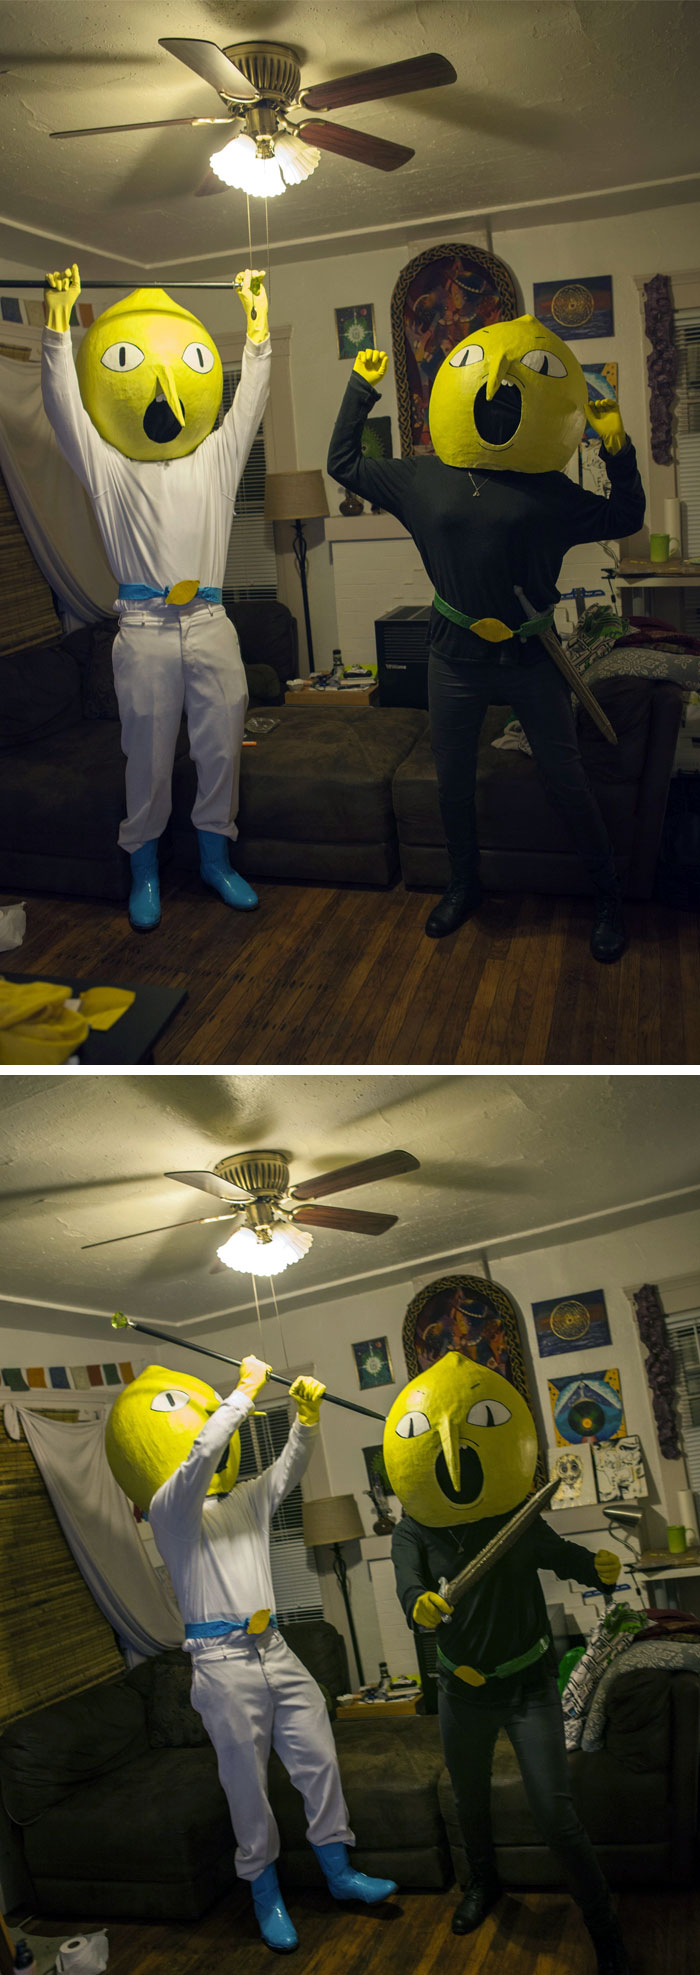 My BF And I Made 'Earl Of Lemongrab' Costumes For Halloween A Few Years Ago